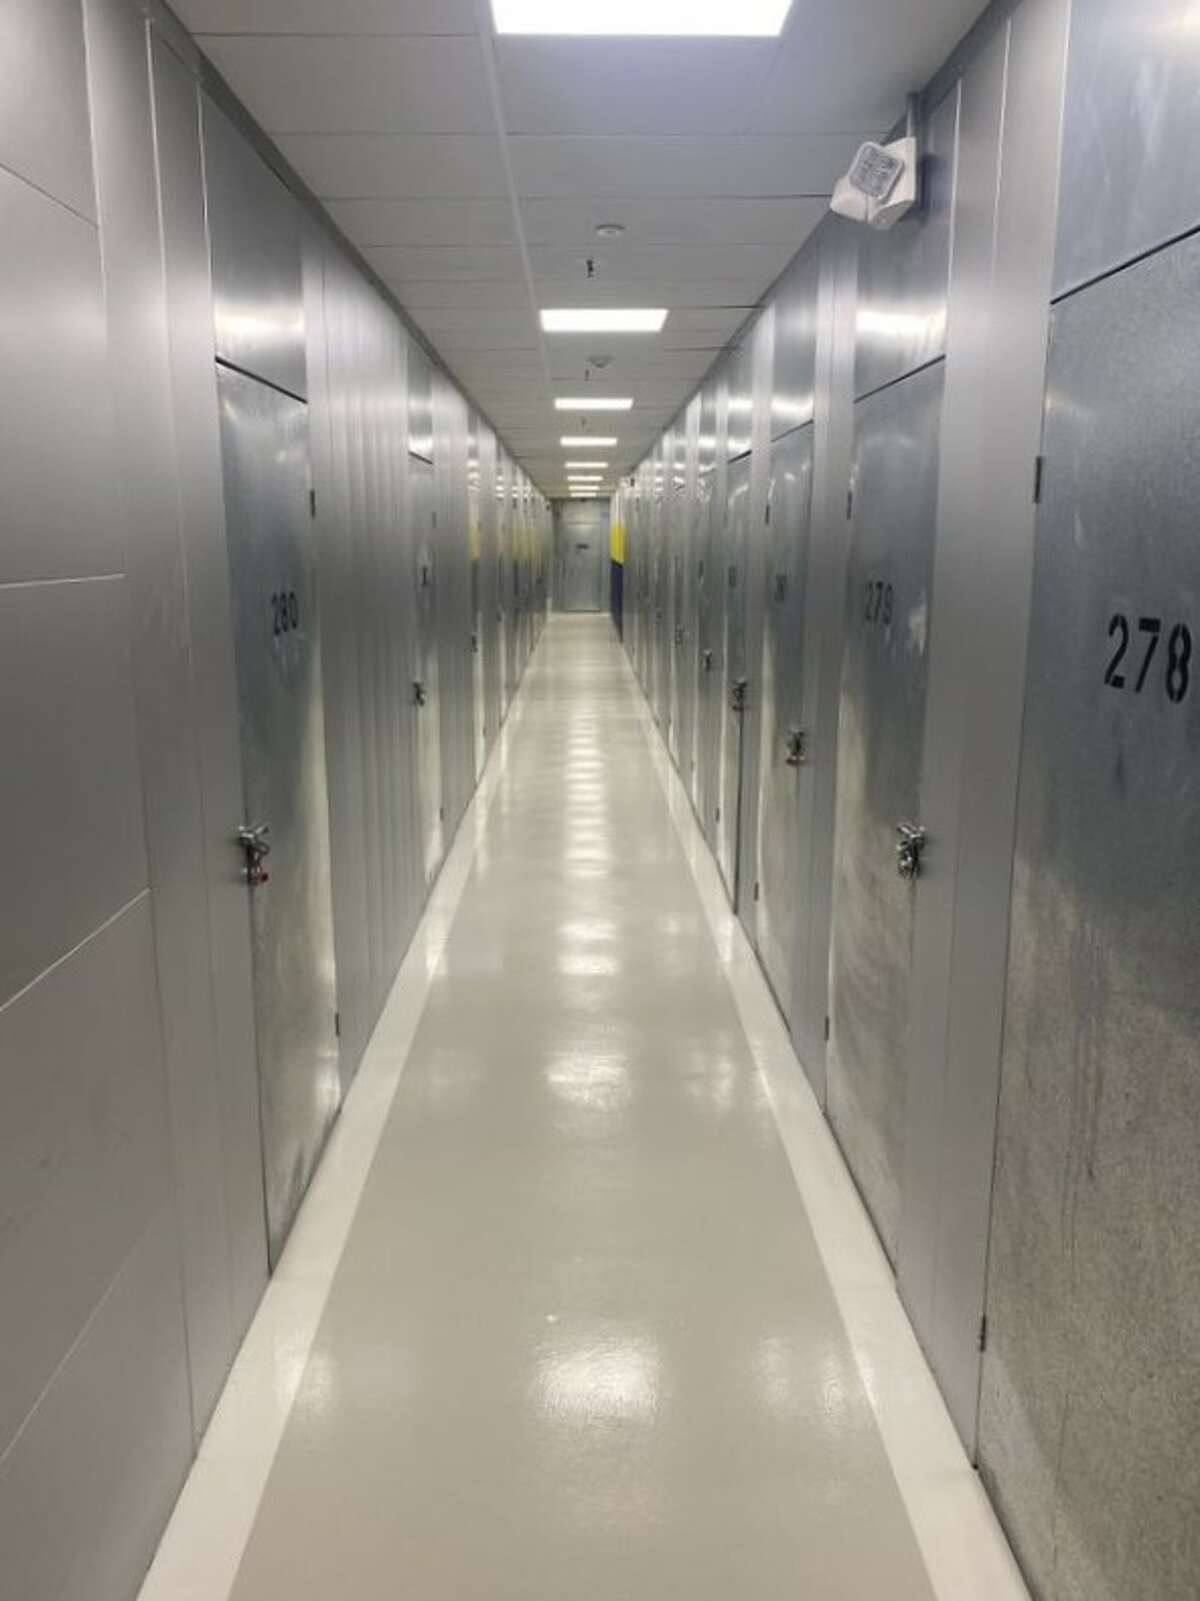 The facility at Storage Sense Stamford is four stories tall and boasts 285 self-storage units that come in a variety of sizes, including 3x6 feet, 5x5 feet, and 10x15 feet.